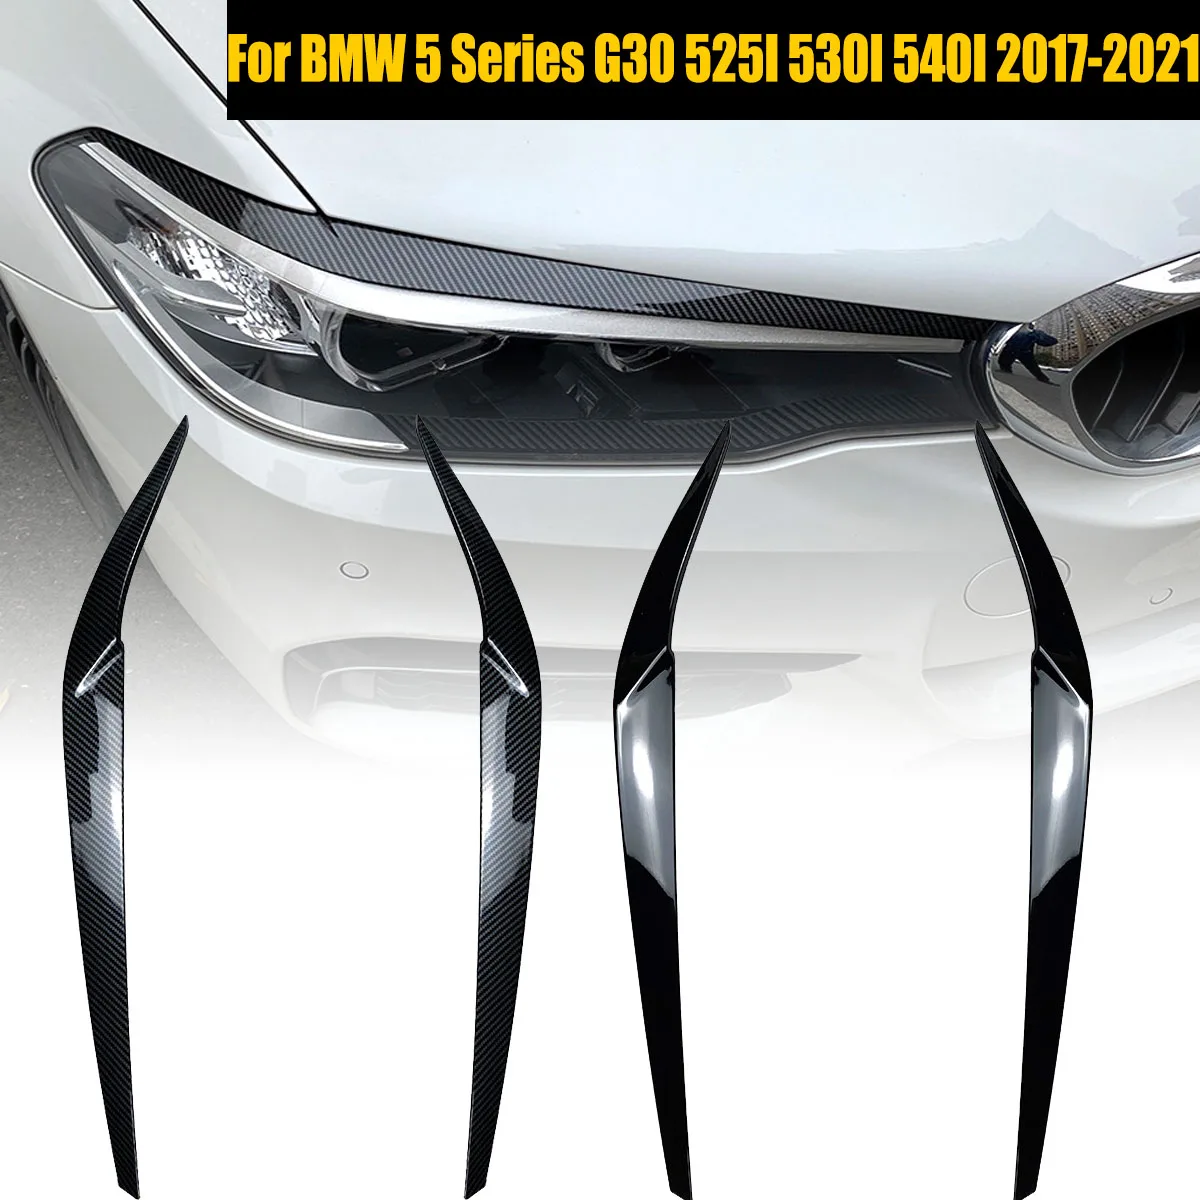 

For BMW 5 Series G30 G31 G38 F90 M5 525I 530I 540I 2017-2021 Front Headlight Eyelid Eyebrow Trim Cover Stickers Car Accessories